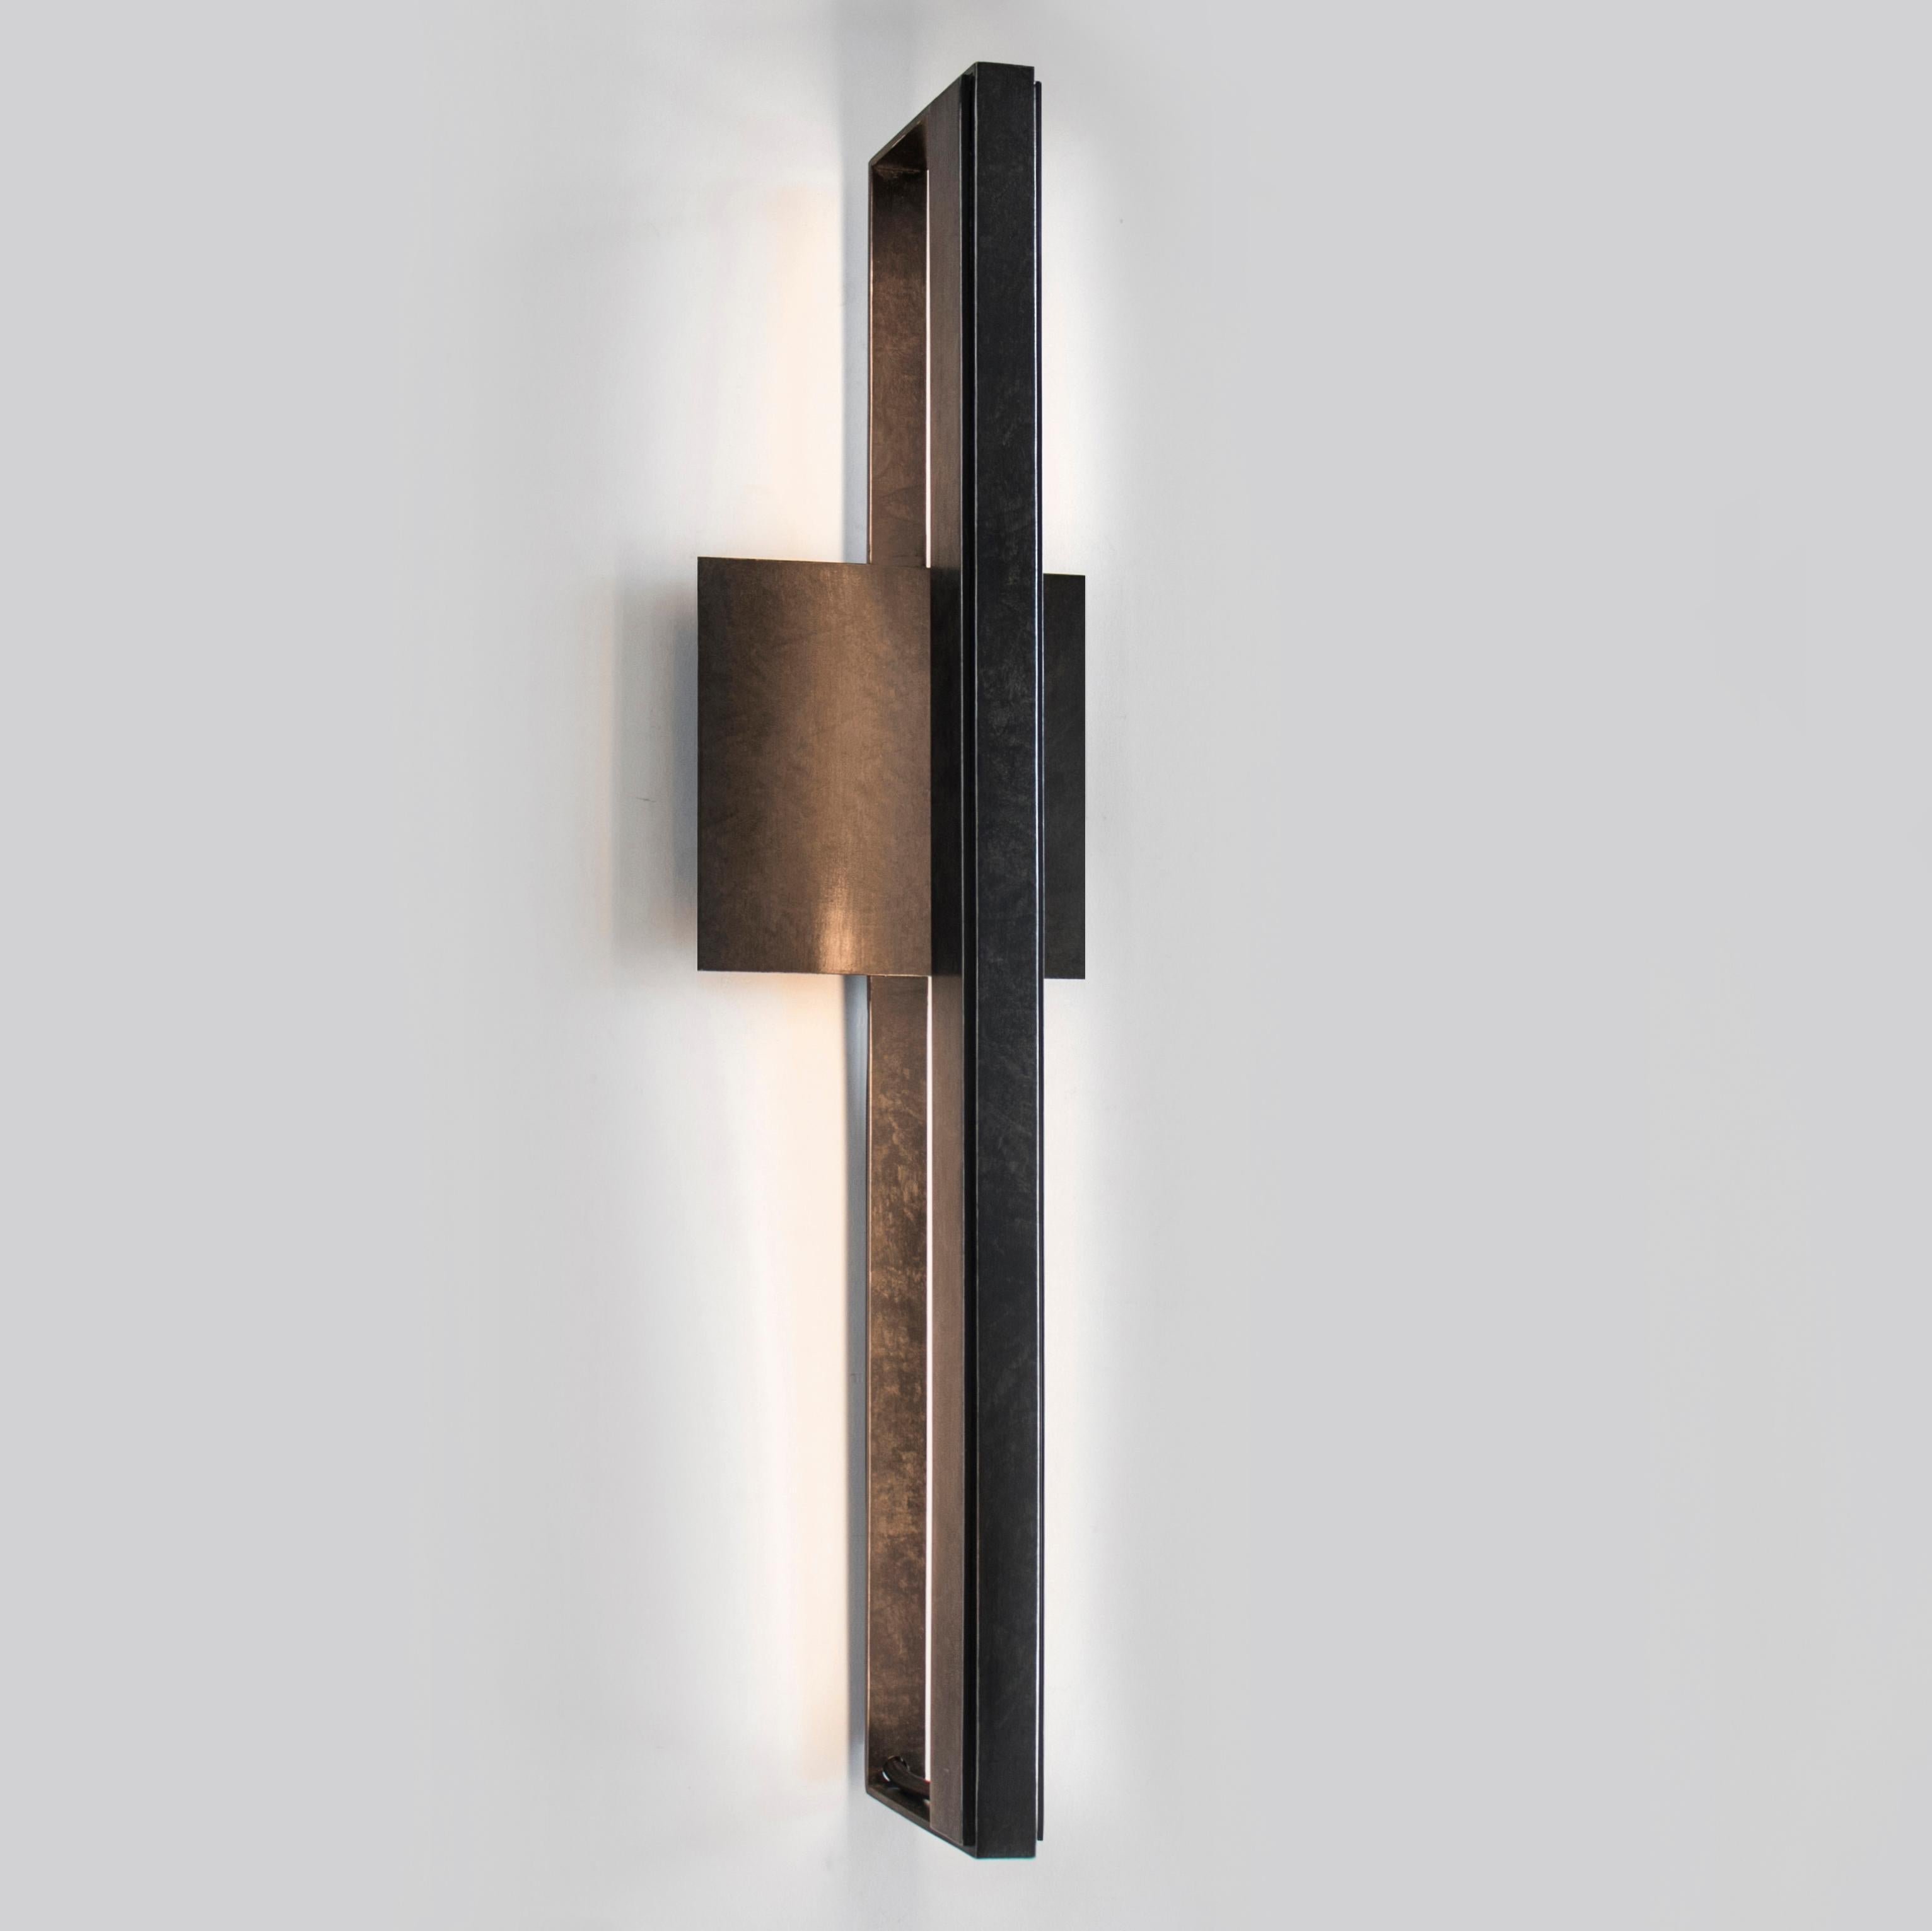 The bar wall sconce is an elegant fixture that is built of cold-rolled steel, with an LED light source. The simplicity of the sconce makes it a perfect choice for bathroom vanities, dining rooms, living rooms, master bedrooms, and